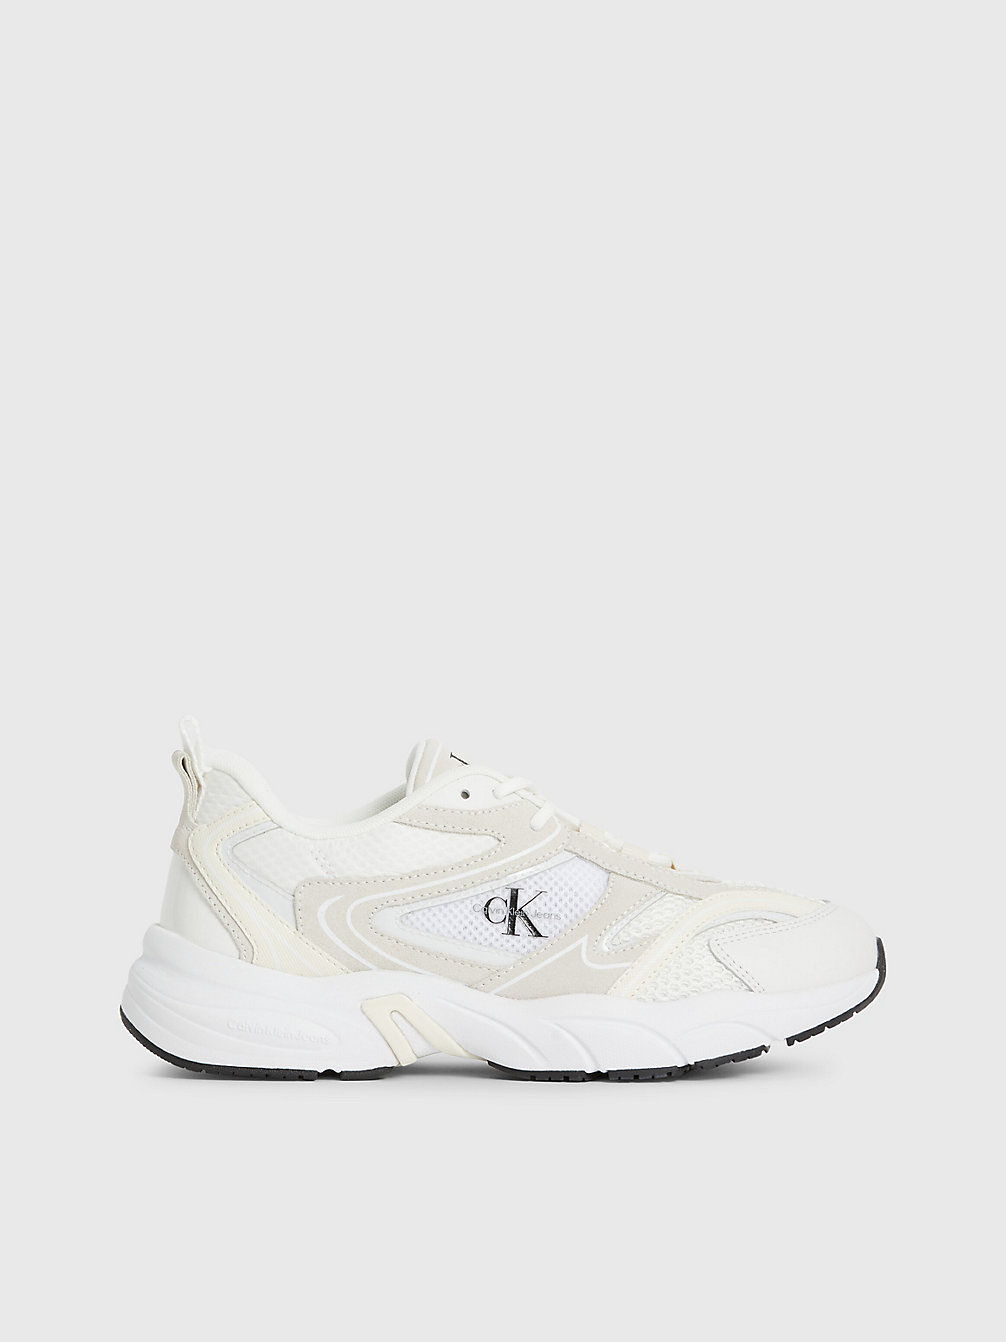 WHITE/CREAMY WHITE/BLACK Suede And Mesh Trainers undefined women Calvin Klein